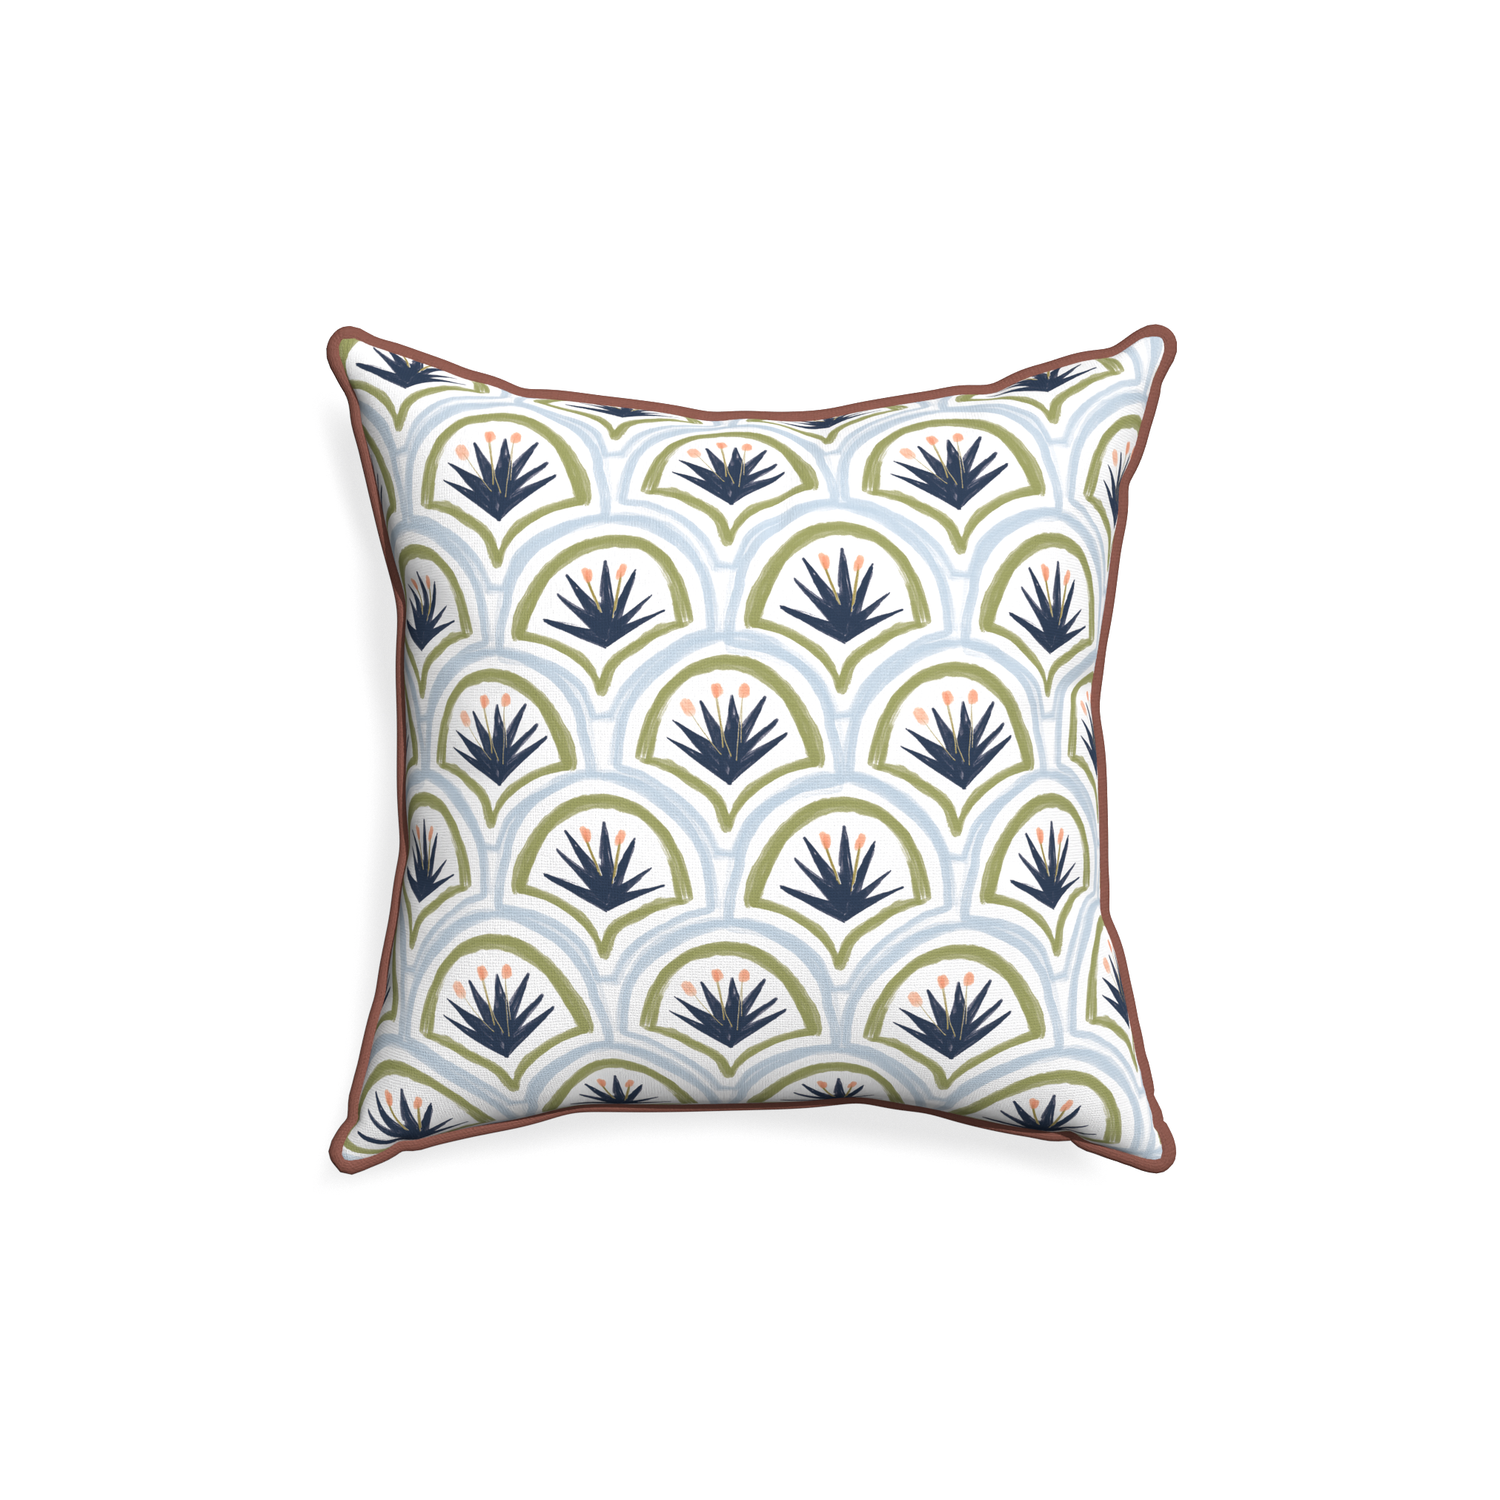 18-square thatcher midnight custom art deco palm patternpillow with w piping on white background